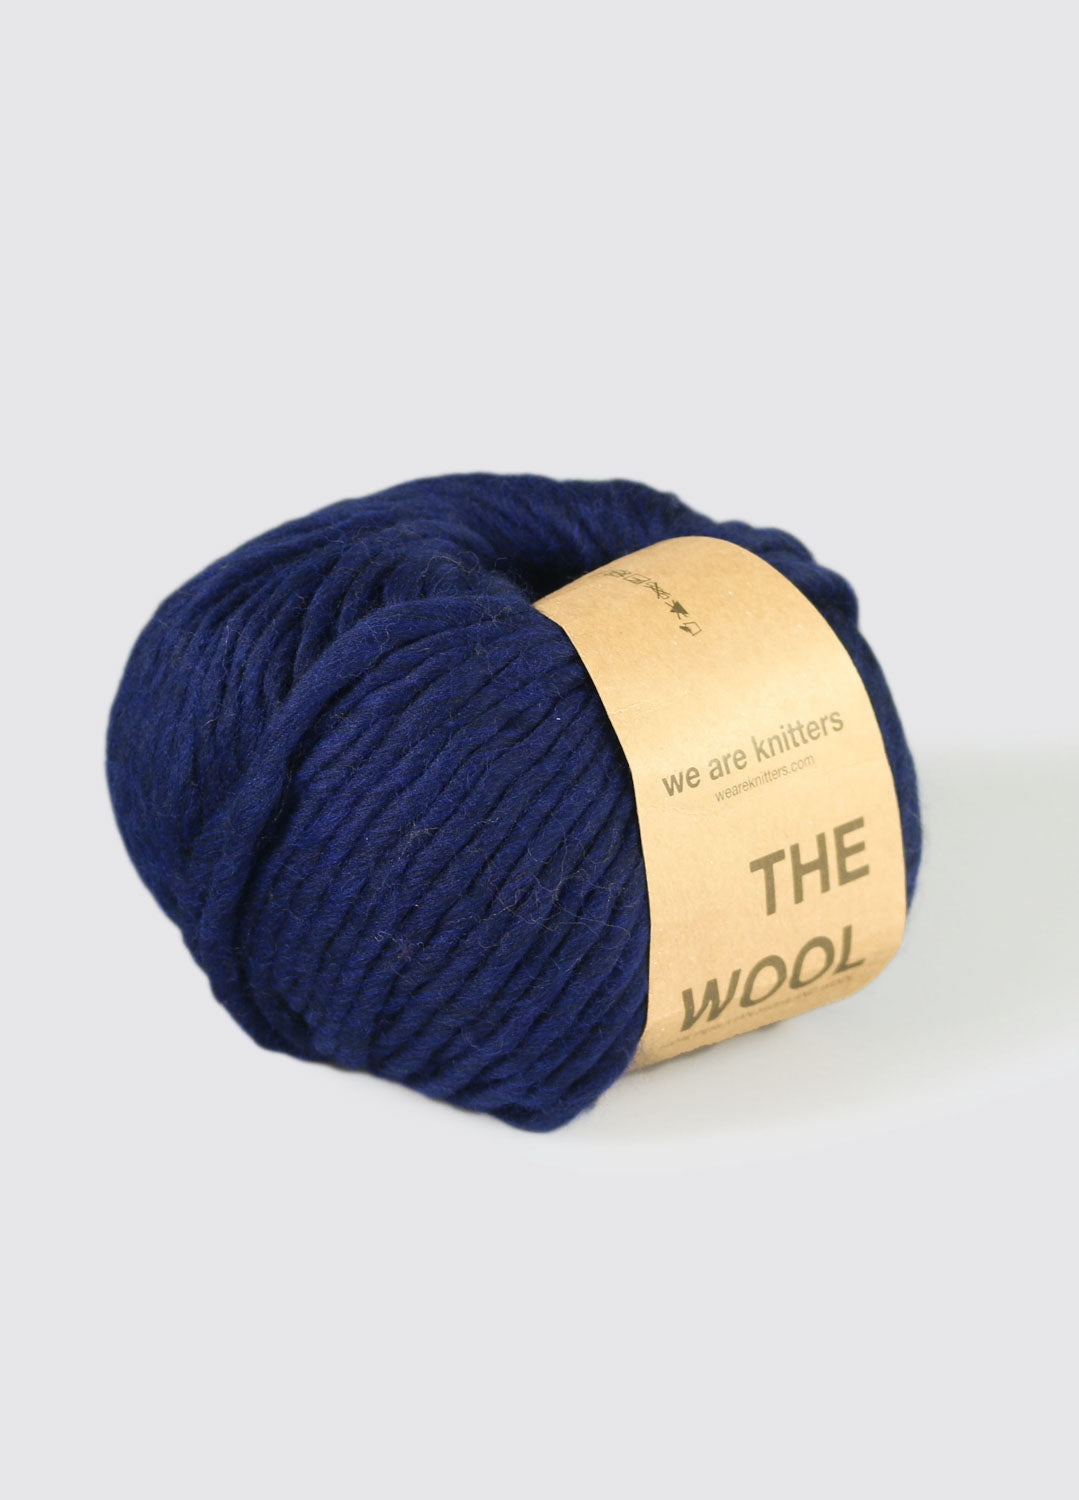 The Wool Navy Blue